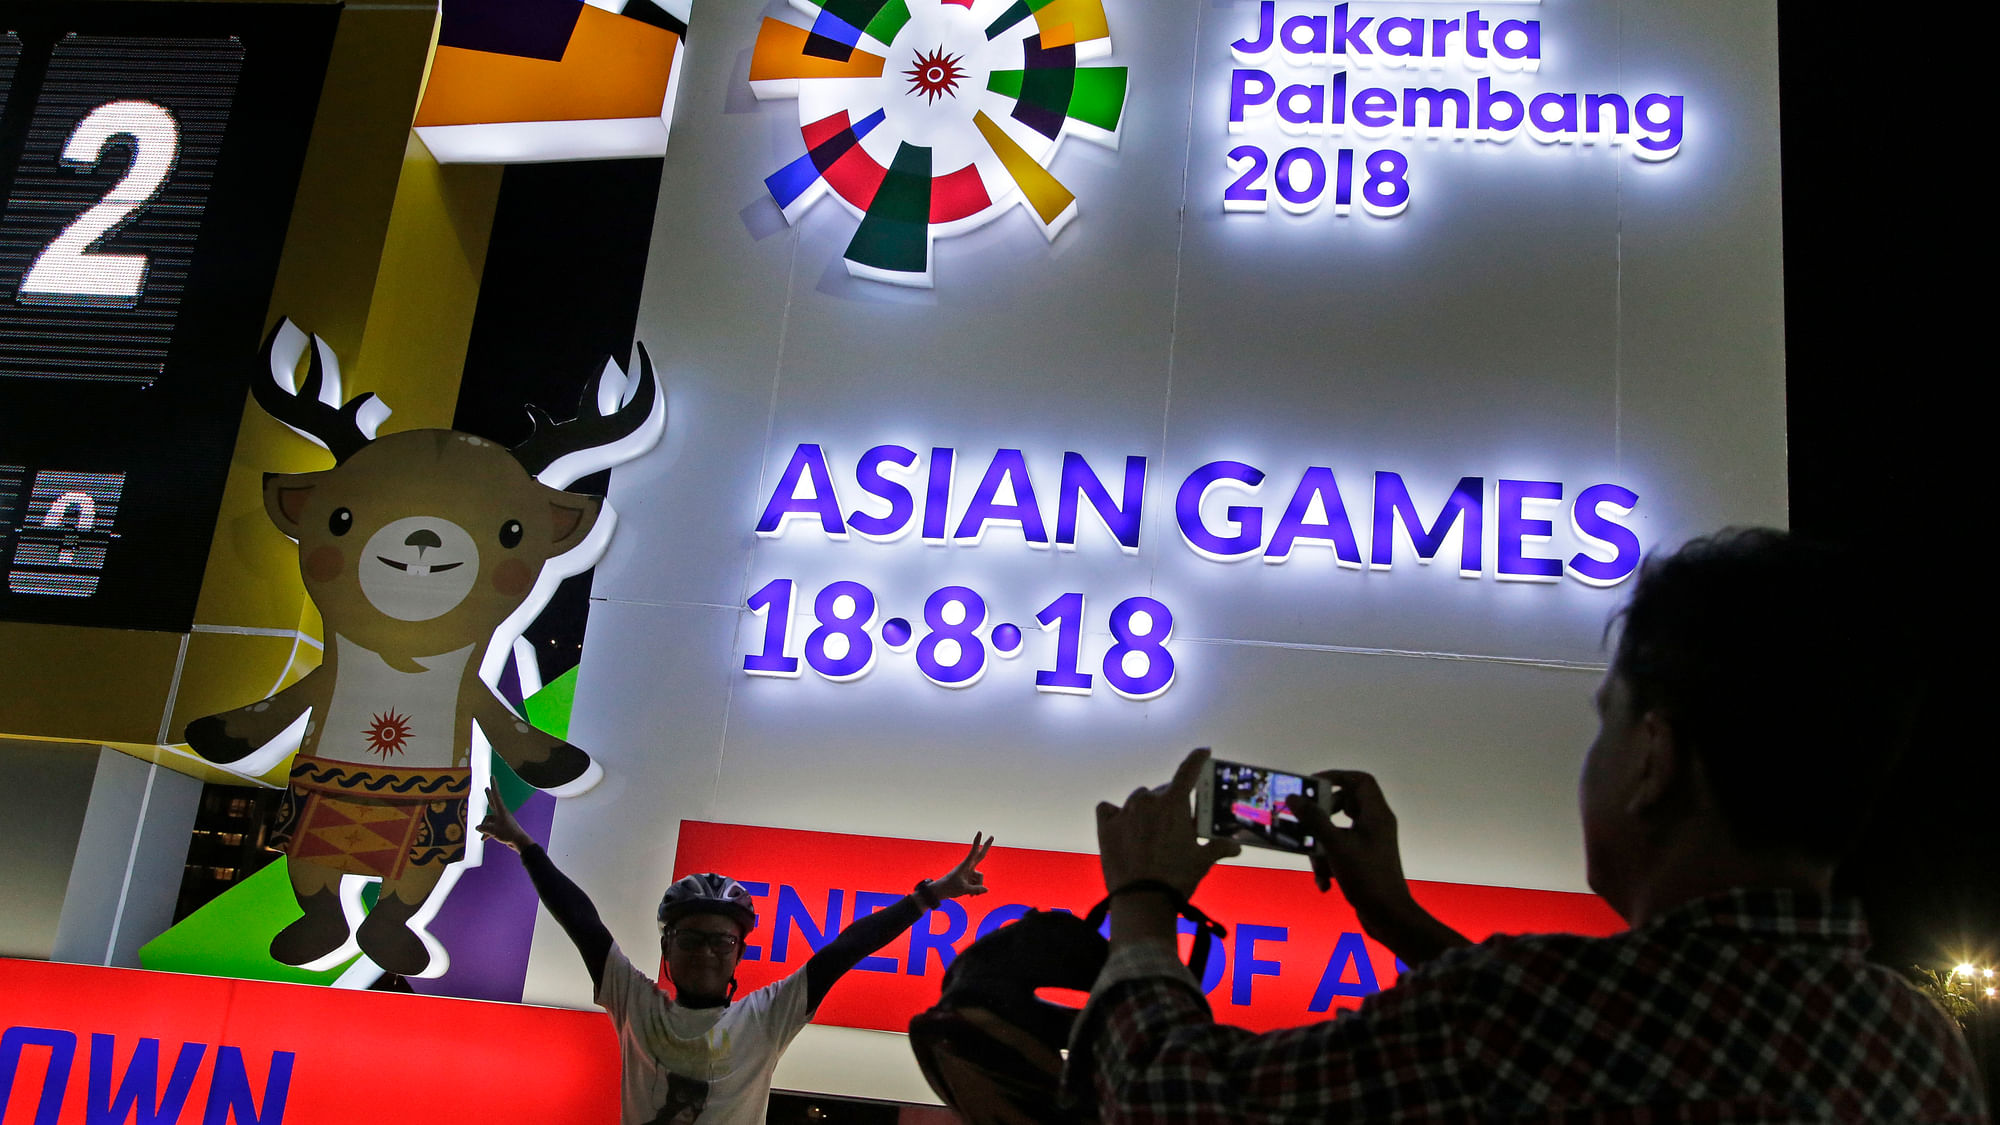 The 2018 Asian Games are being jointly hosted by Jakarta and Palembang in Indonesia.